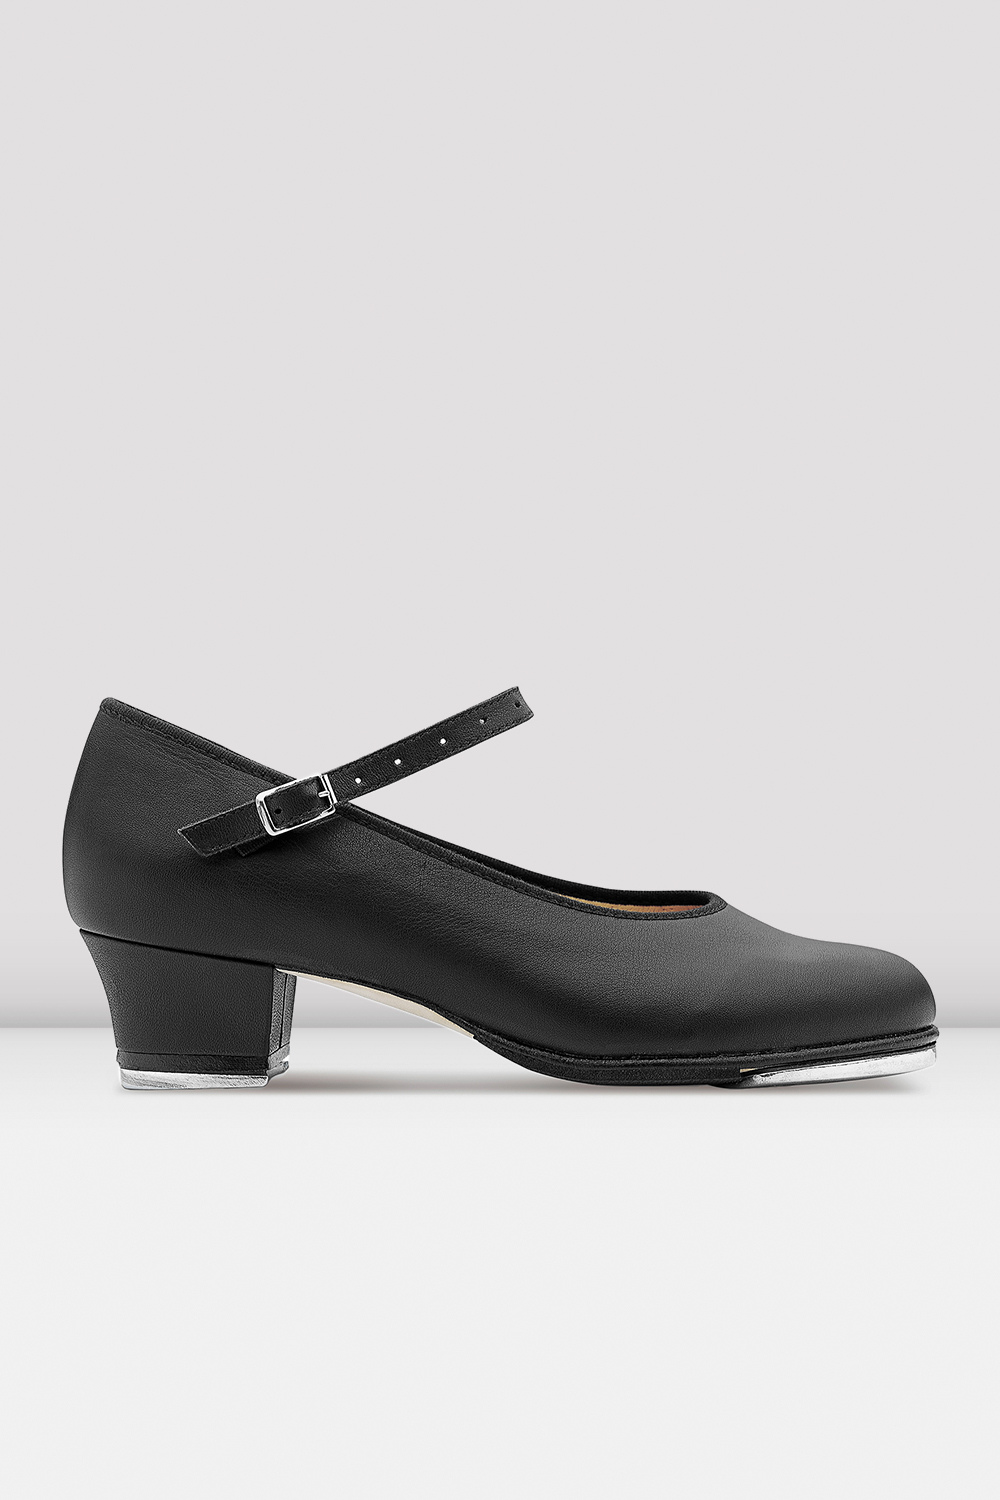 BLOCH Ladies Showtapper Leather Tap Shoes, Black Leather